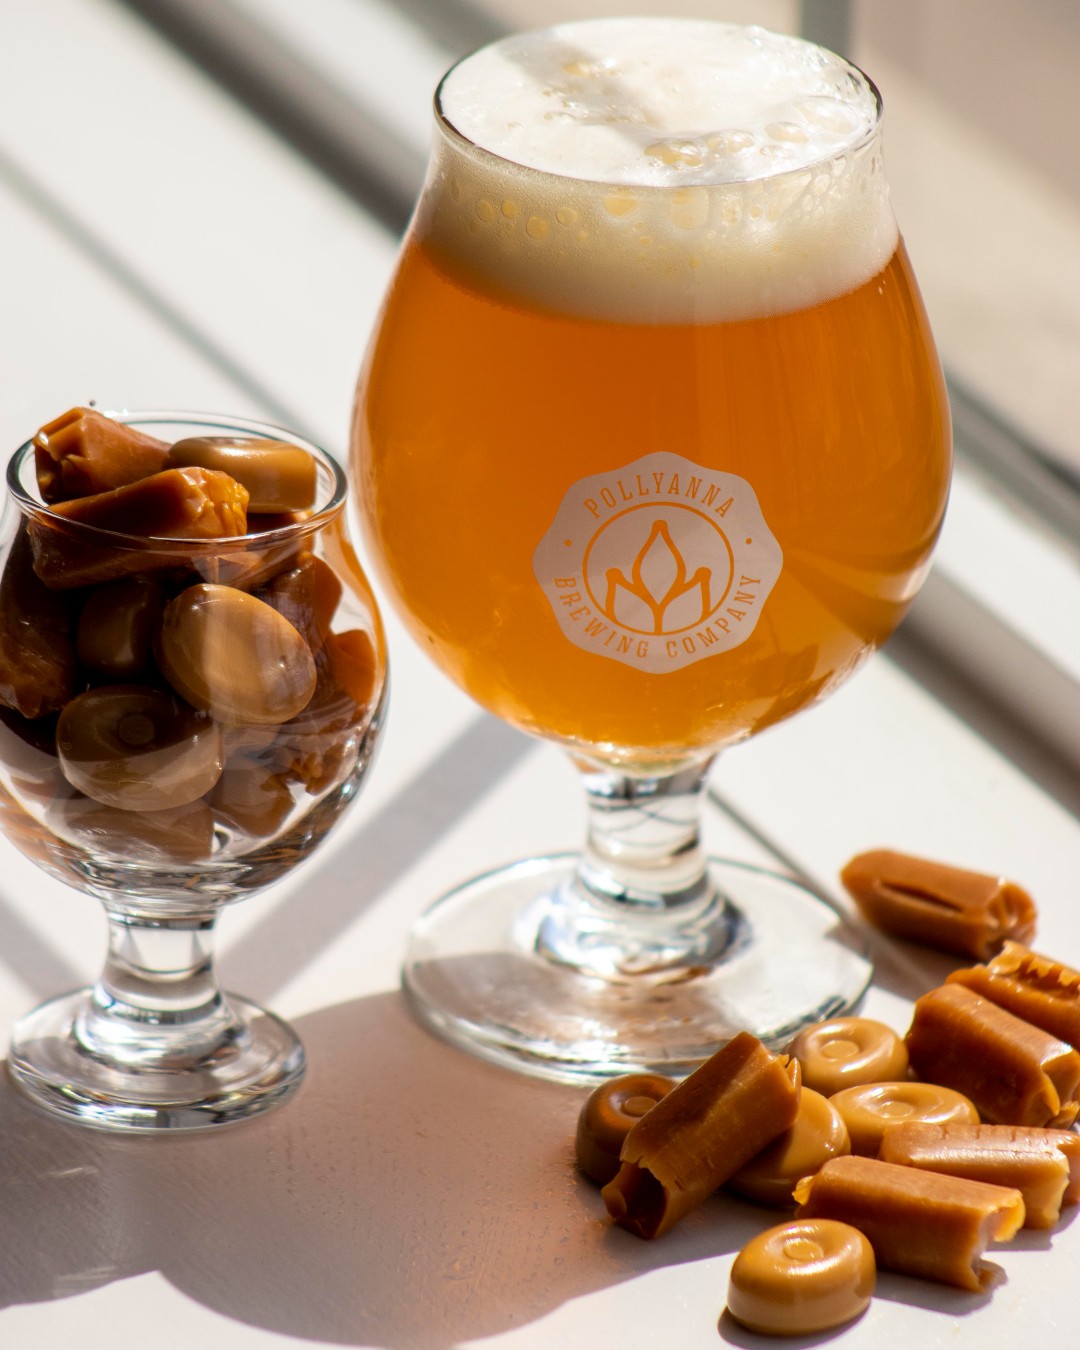 Glass of Pollyanna beer surrounded by caramel candies